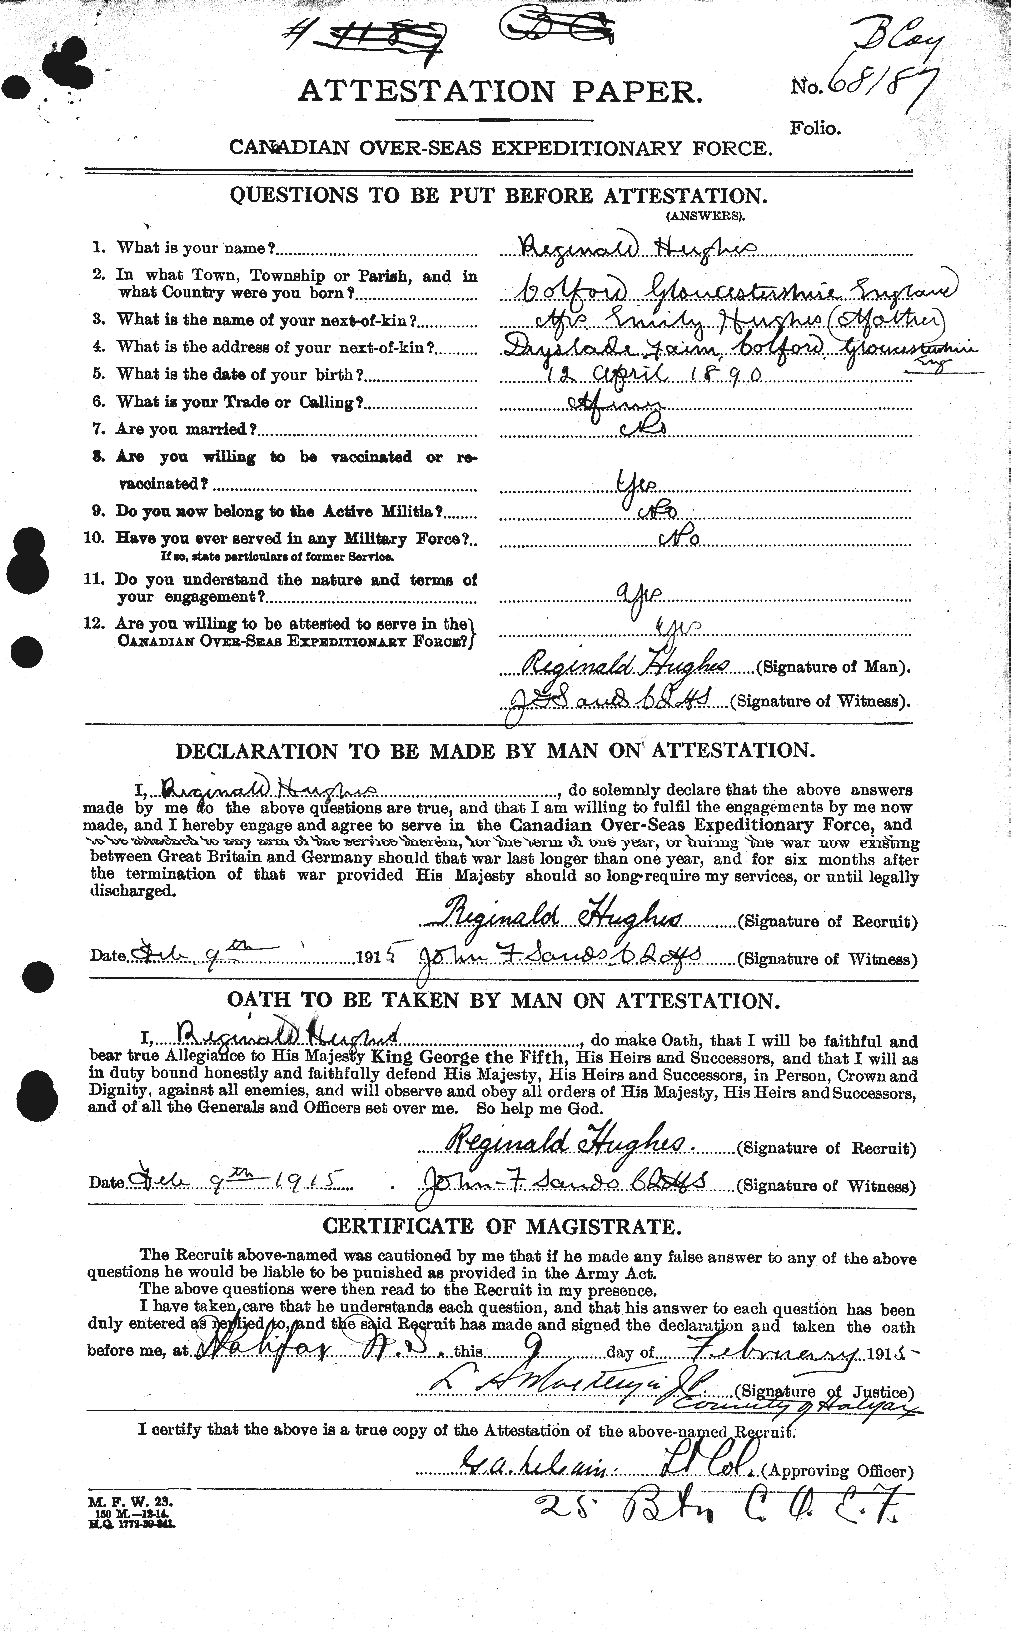 Personnel Records of the First World War - CEF 404174a